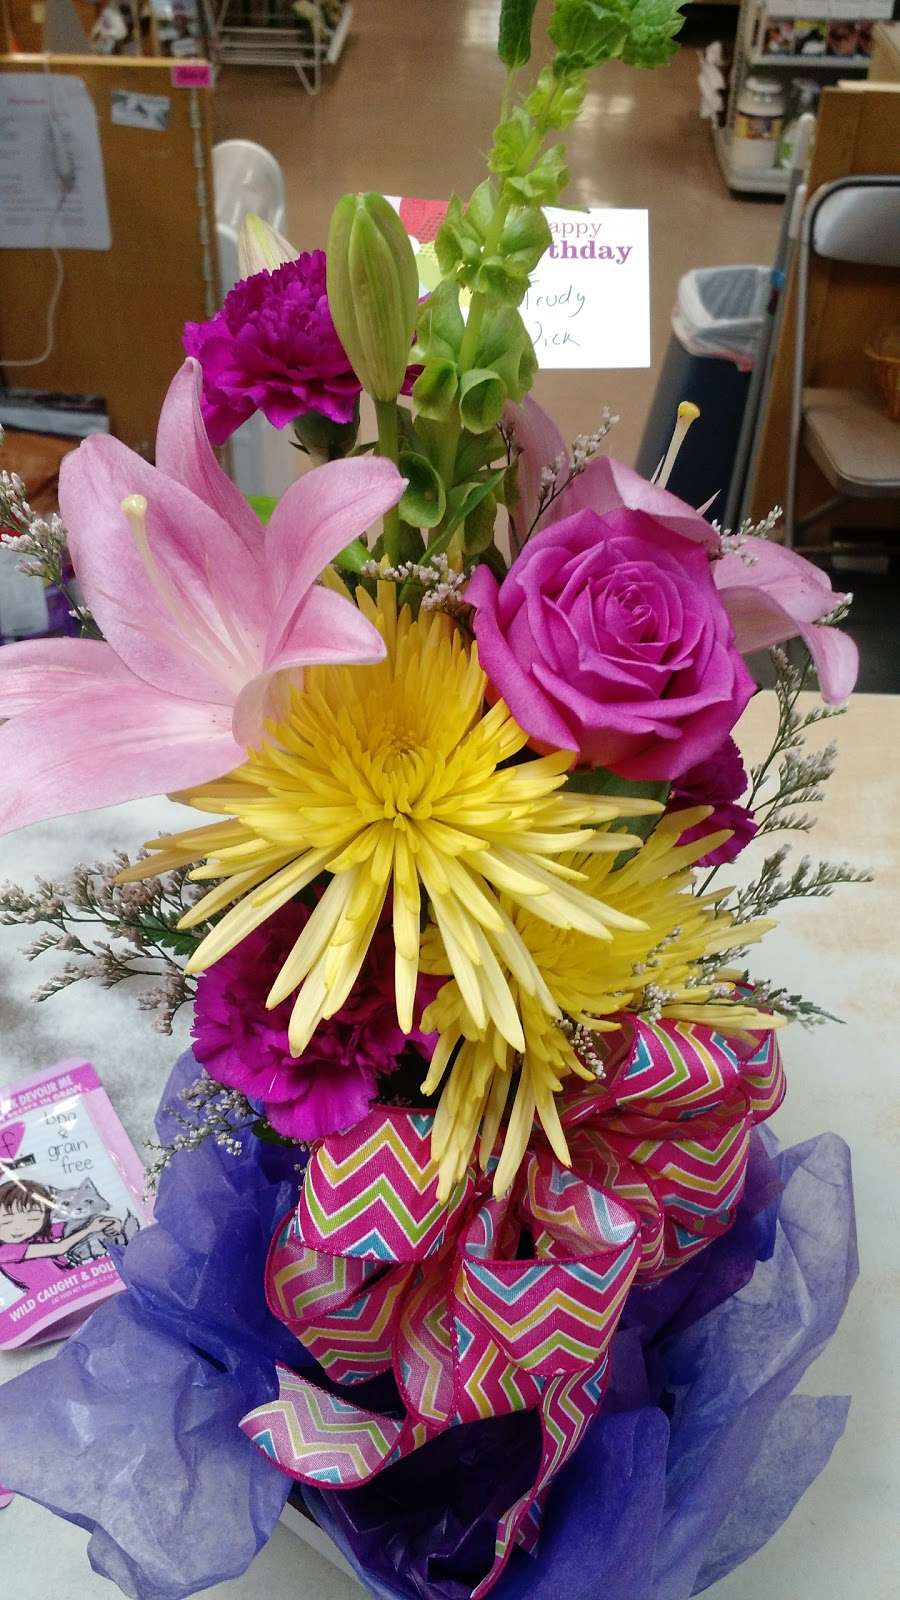 Annes Florals & Gifts | 142 Lowell Rd #6, Hudson, NH 03051, USA | Phone: (603) 889-9903